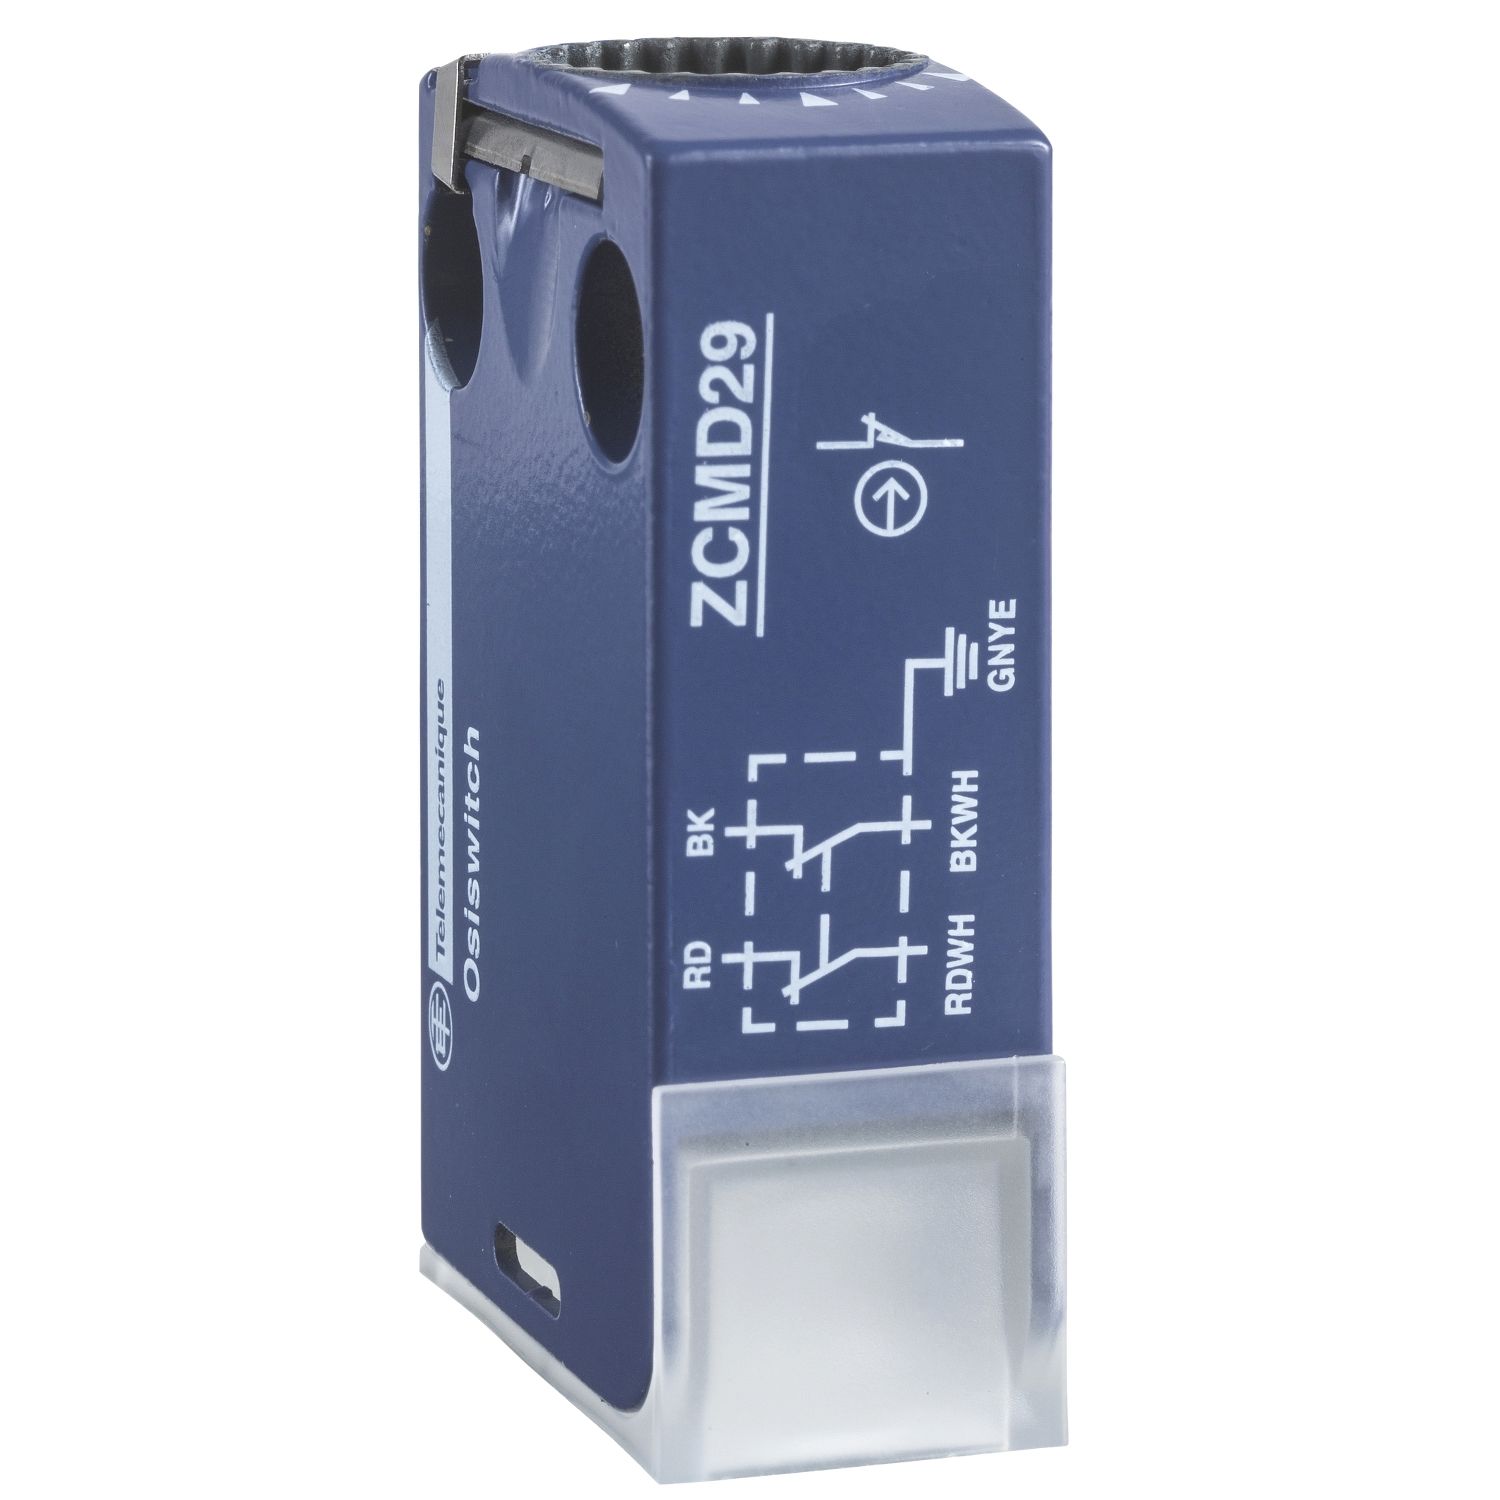 ZCMD21M12 Limit switch body, Limit switches XC Standard, ZCMD, 1C/O, silver, snap action, connection, M12